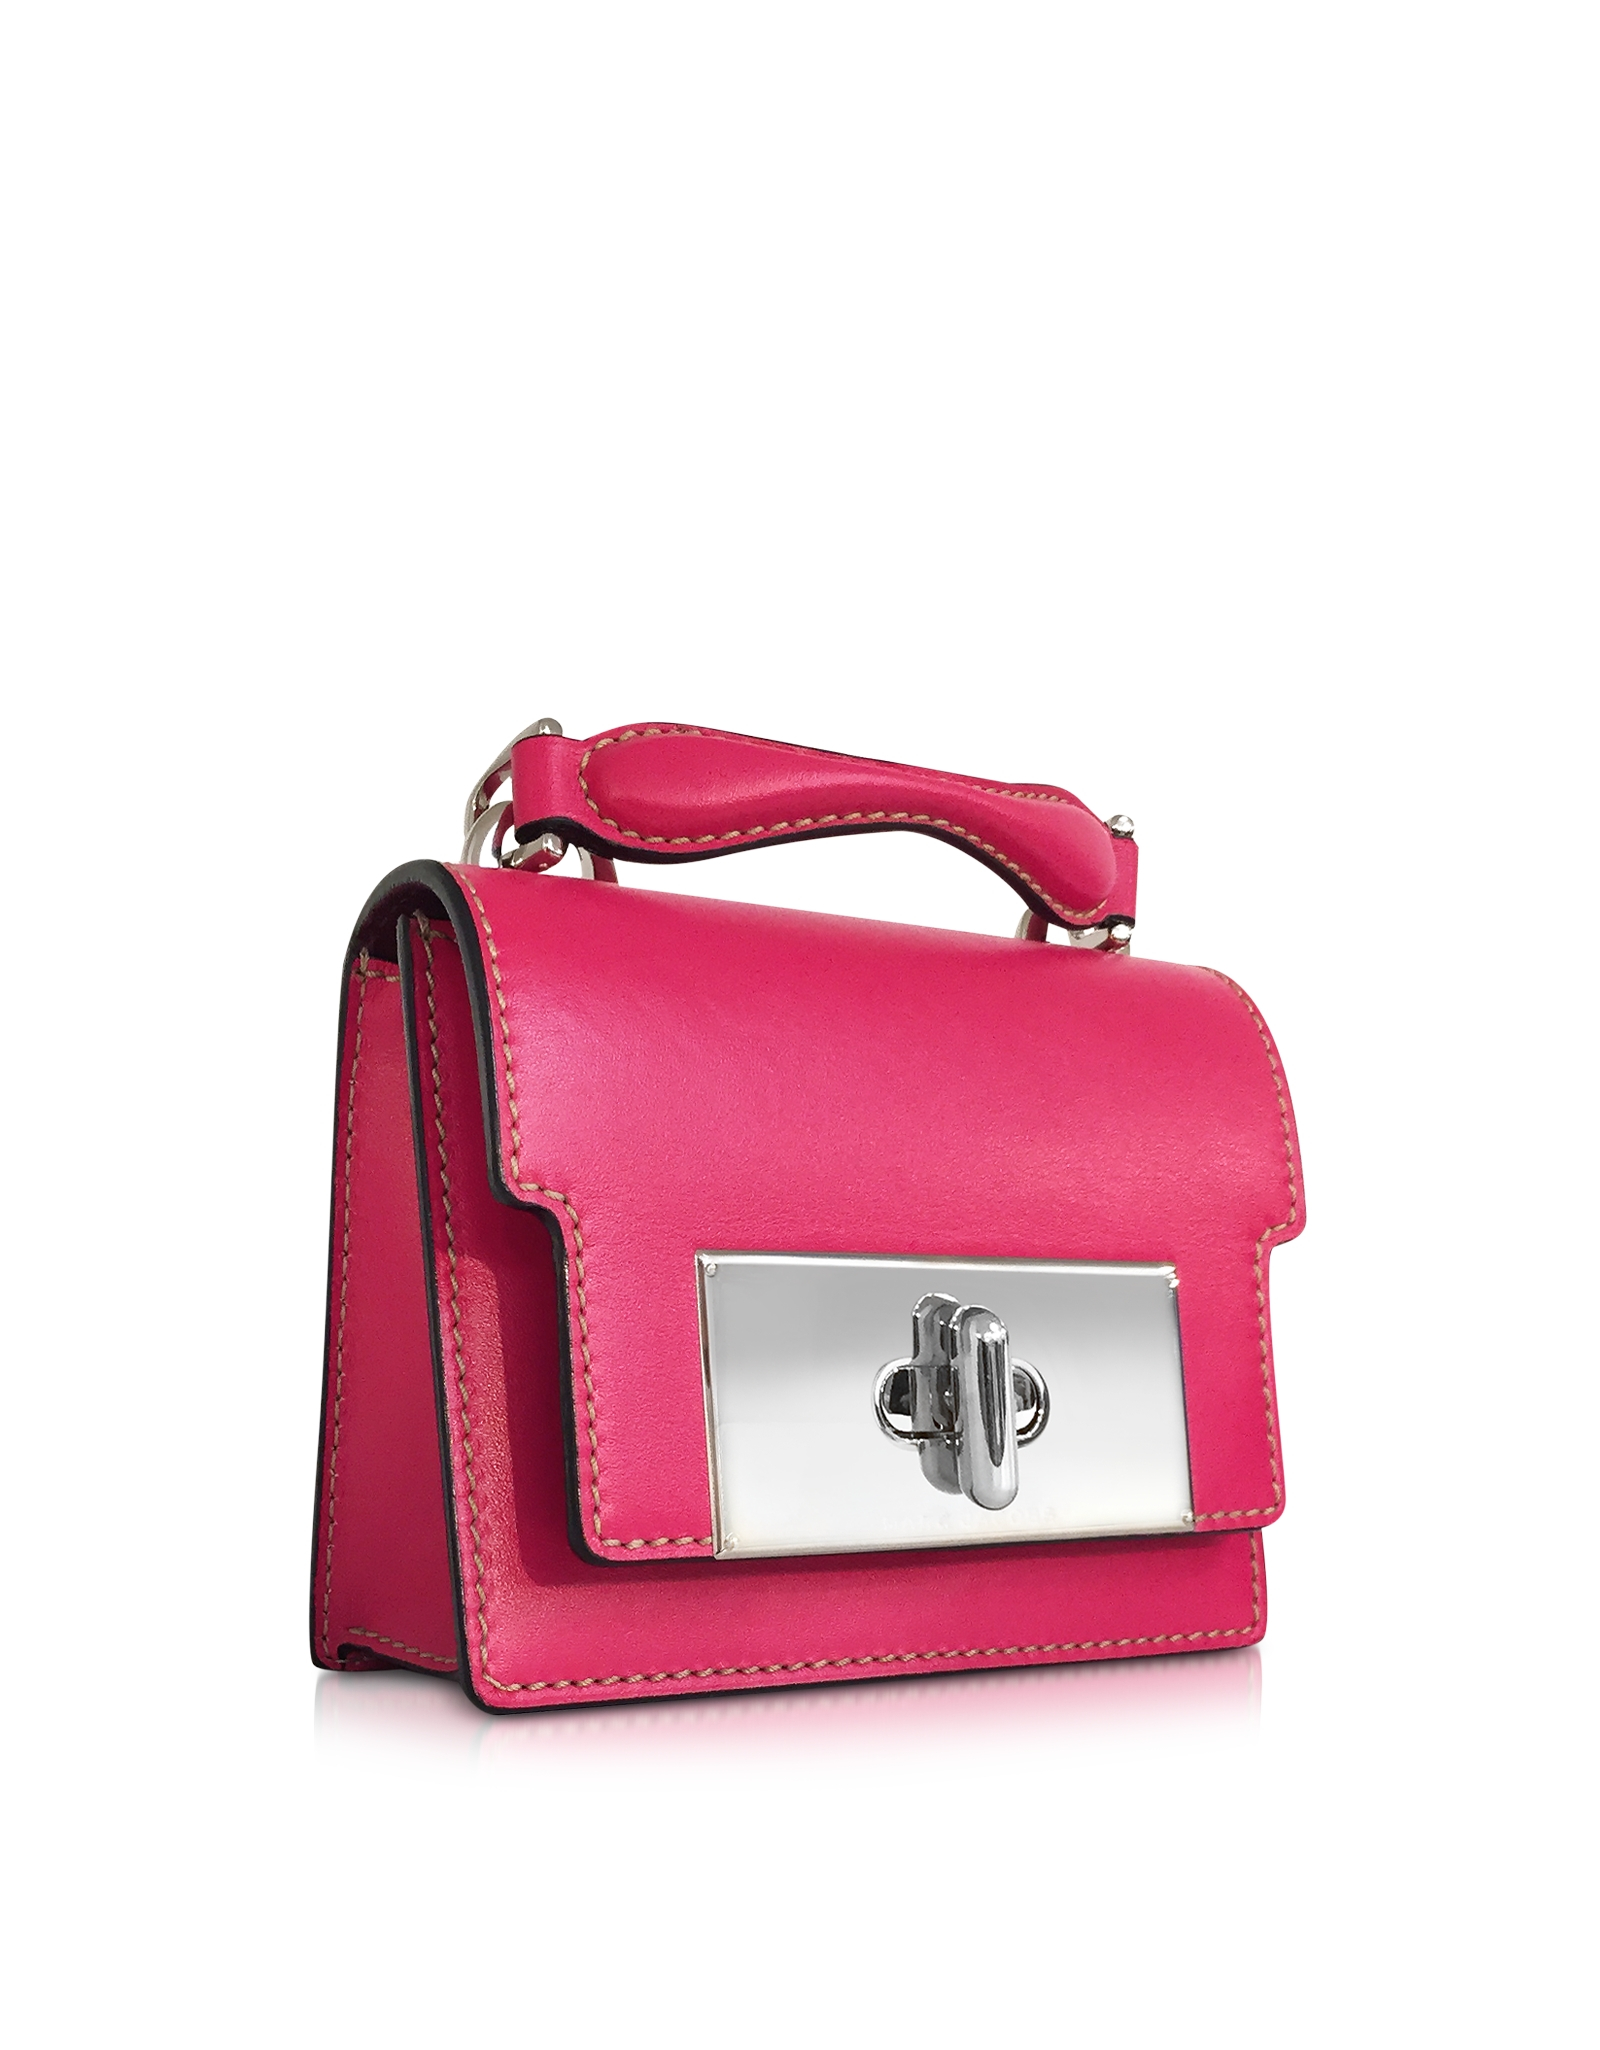 Lyst - Marc Jacobs Shameless Pink Leather Mini Mischief Handbag in Pink